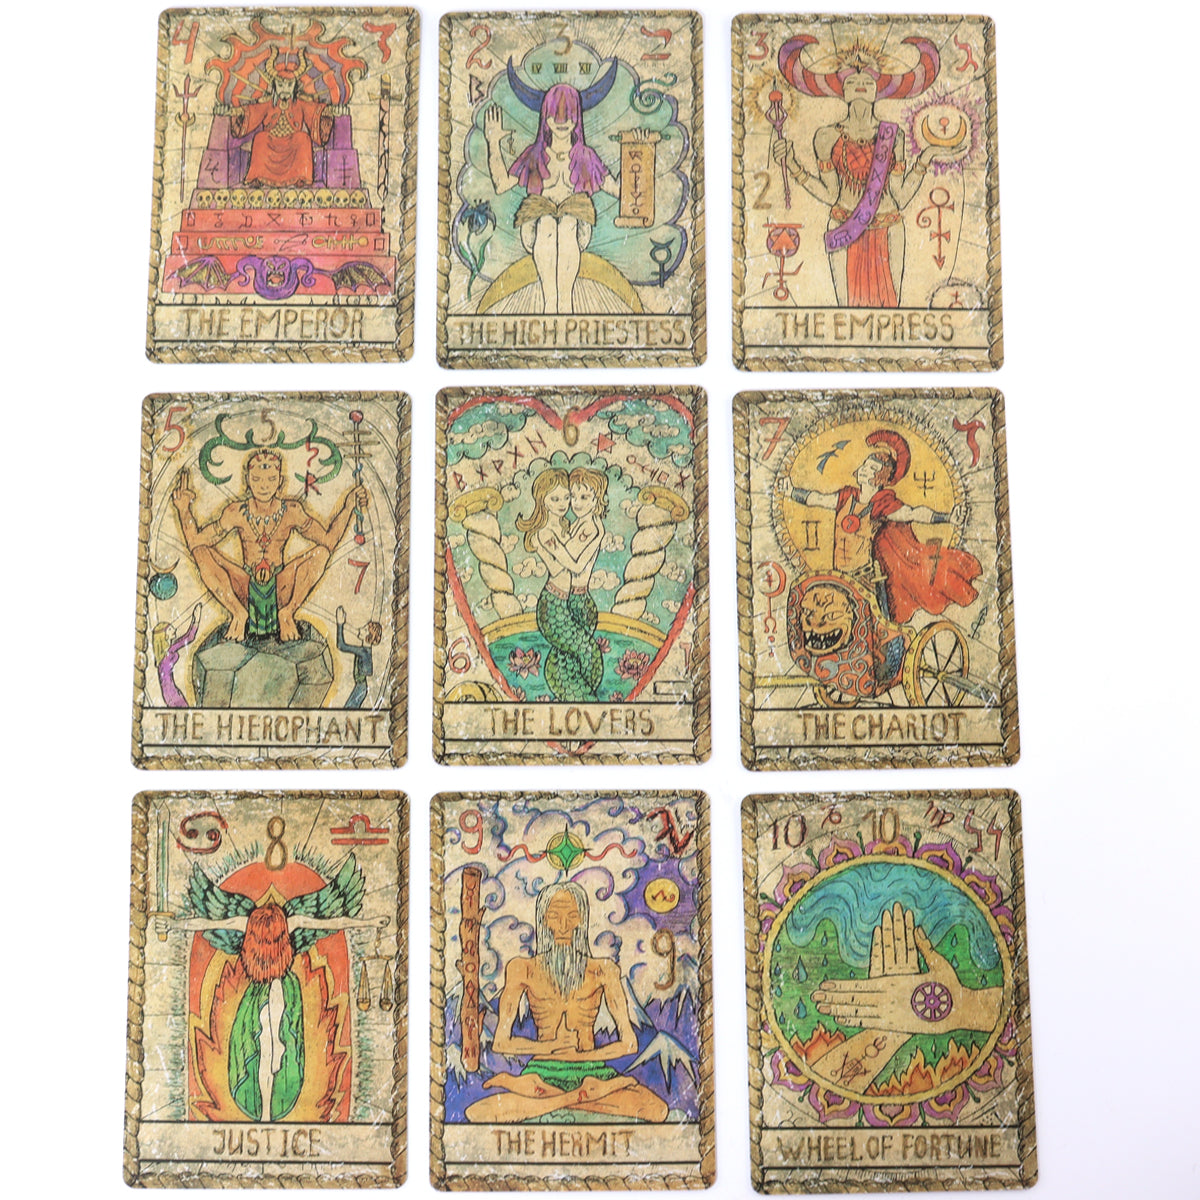 Samiramay Tarot Deck By Vera Petruk's & Guide Booklet Full Deck 78 Cards, 3.5 By 2.5 Inches, Great for Beginners and Collectors - TAROT DECK